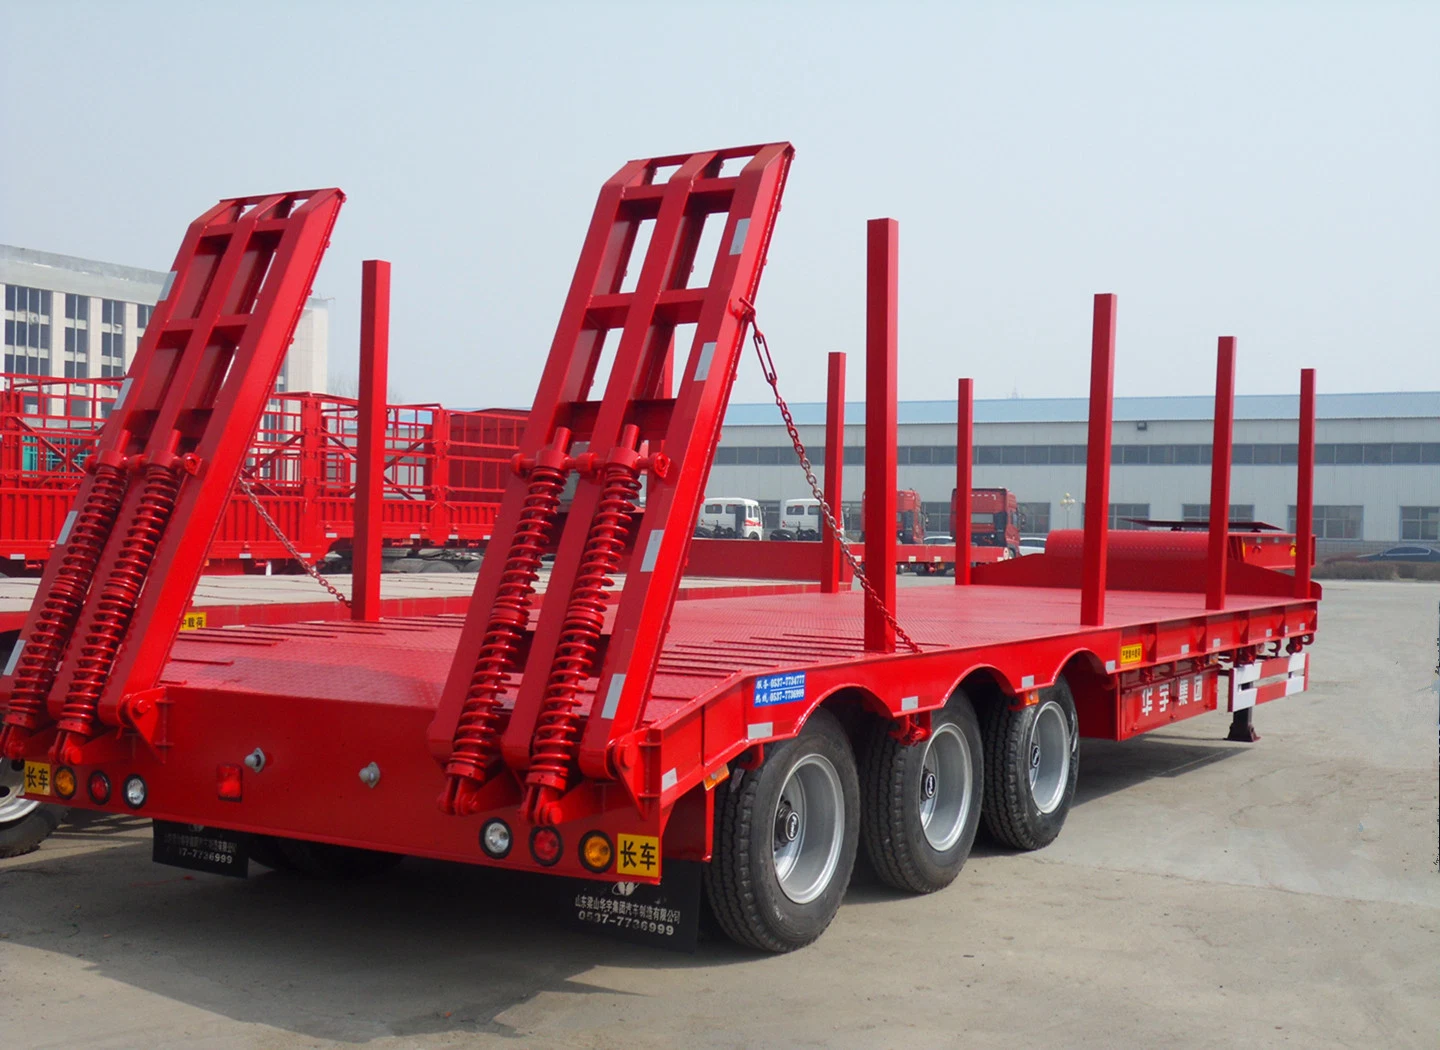 Transport Low Bed Trailer Low Loader 3 Axle 60/70/80 Tons Lowbed Truck Semi Trailer